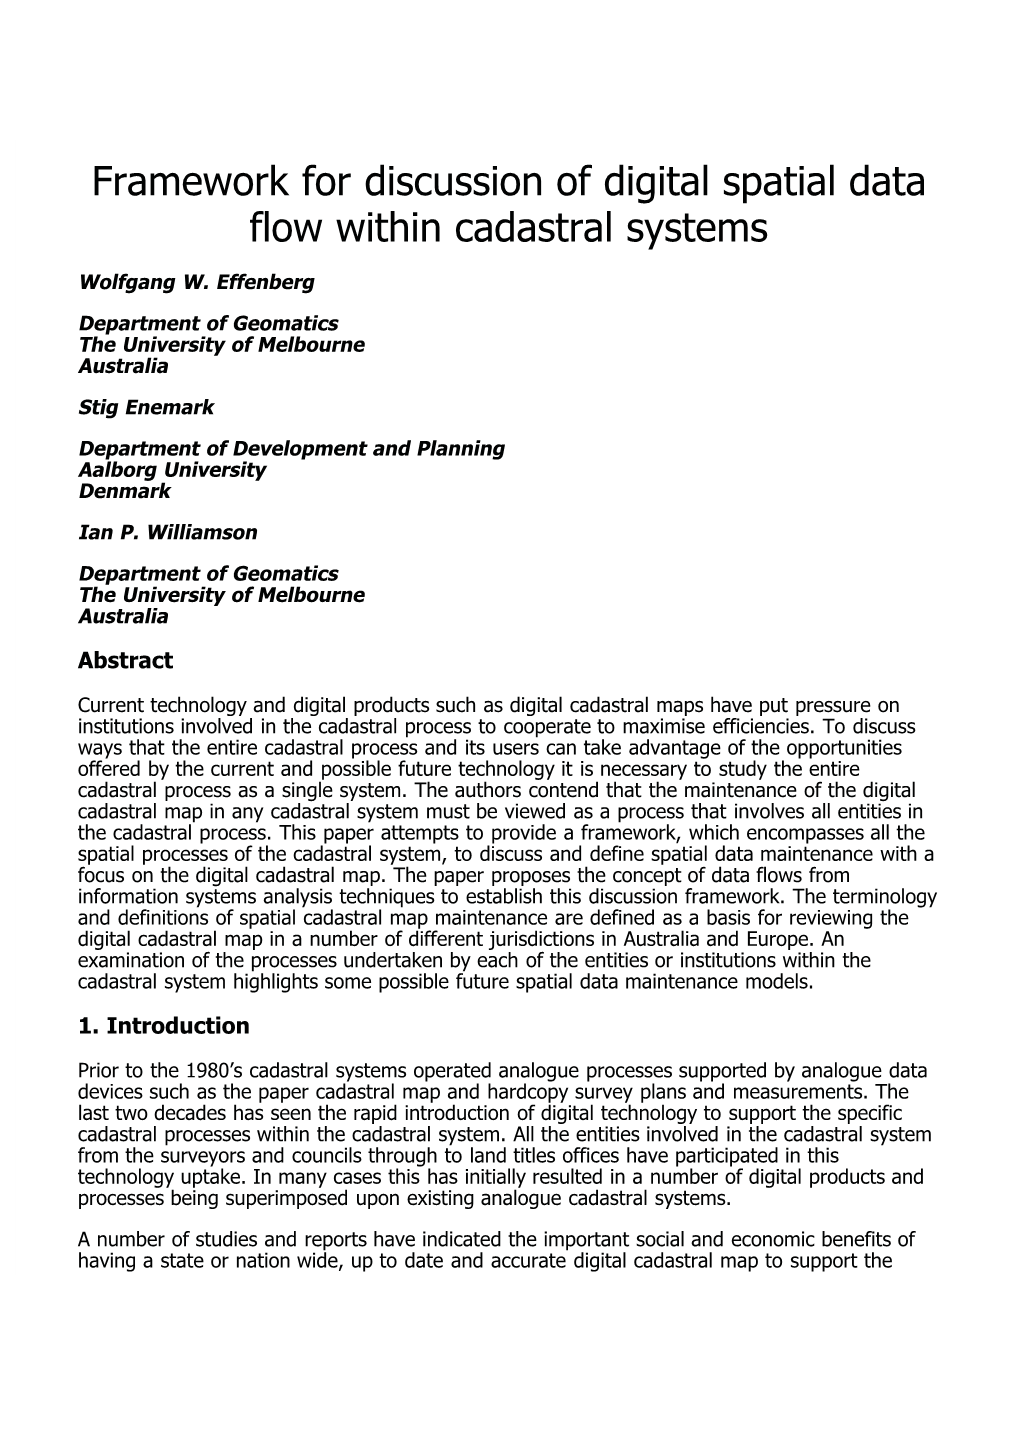 Framework for Discussion of Digital Spatial Data Flow Within Cadastral Systems